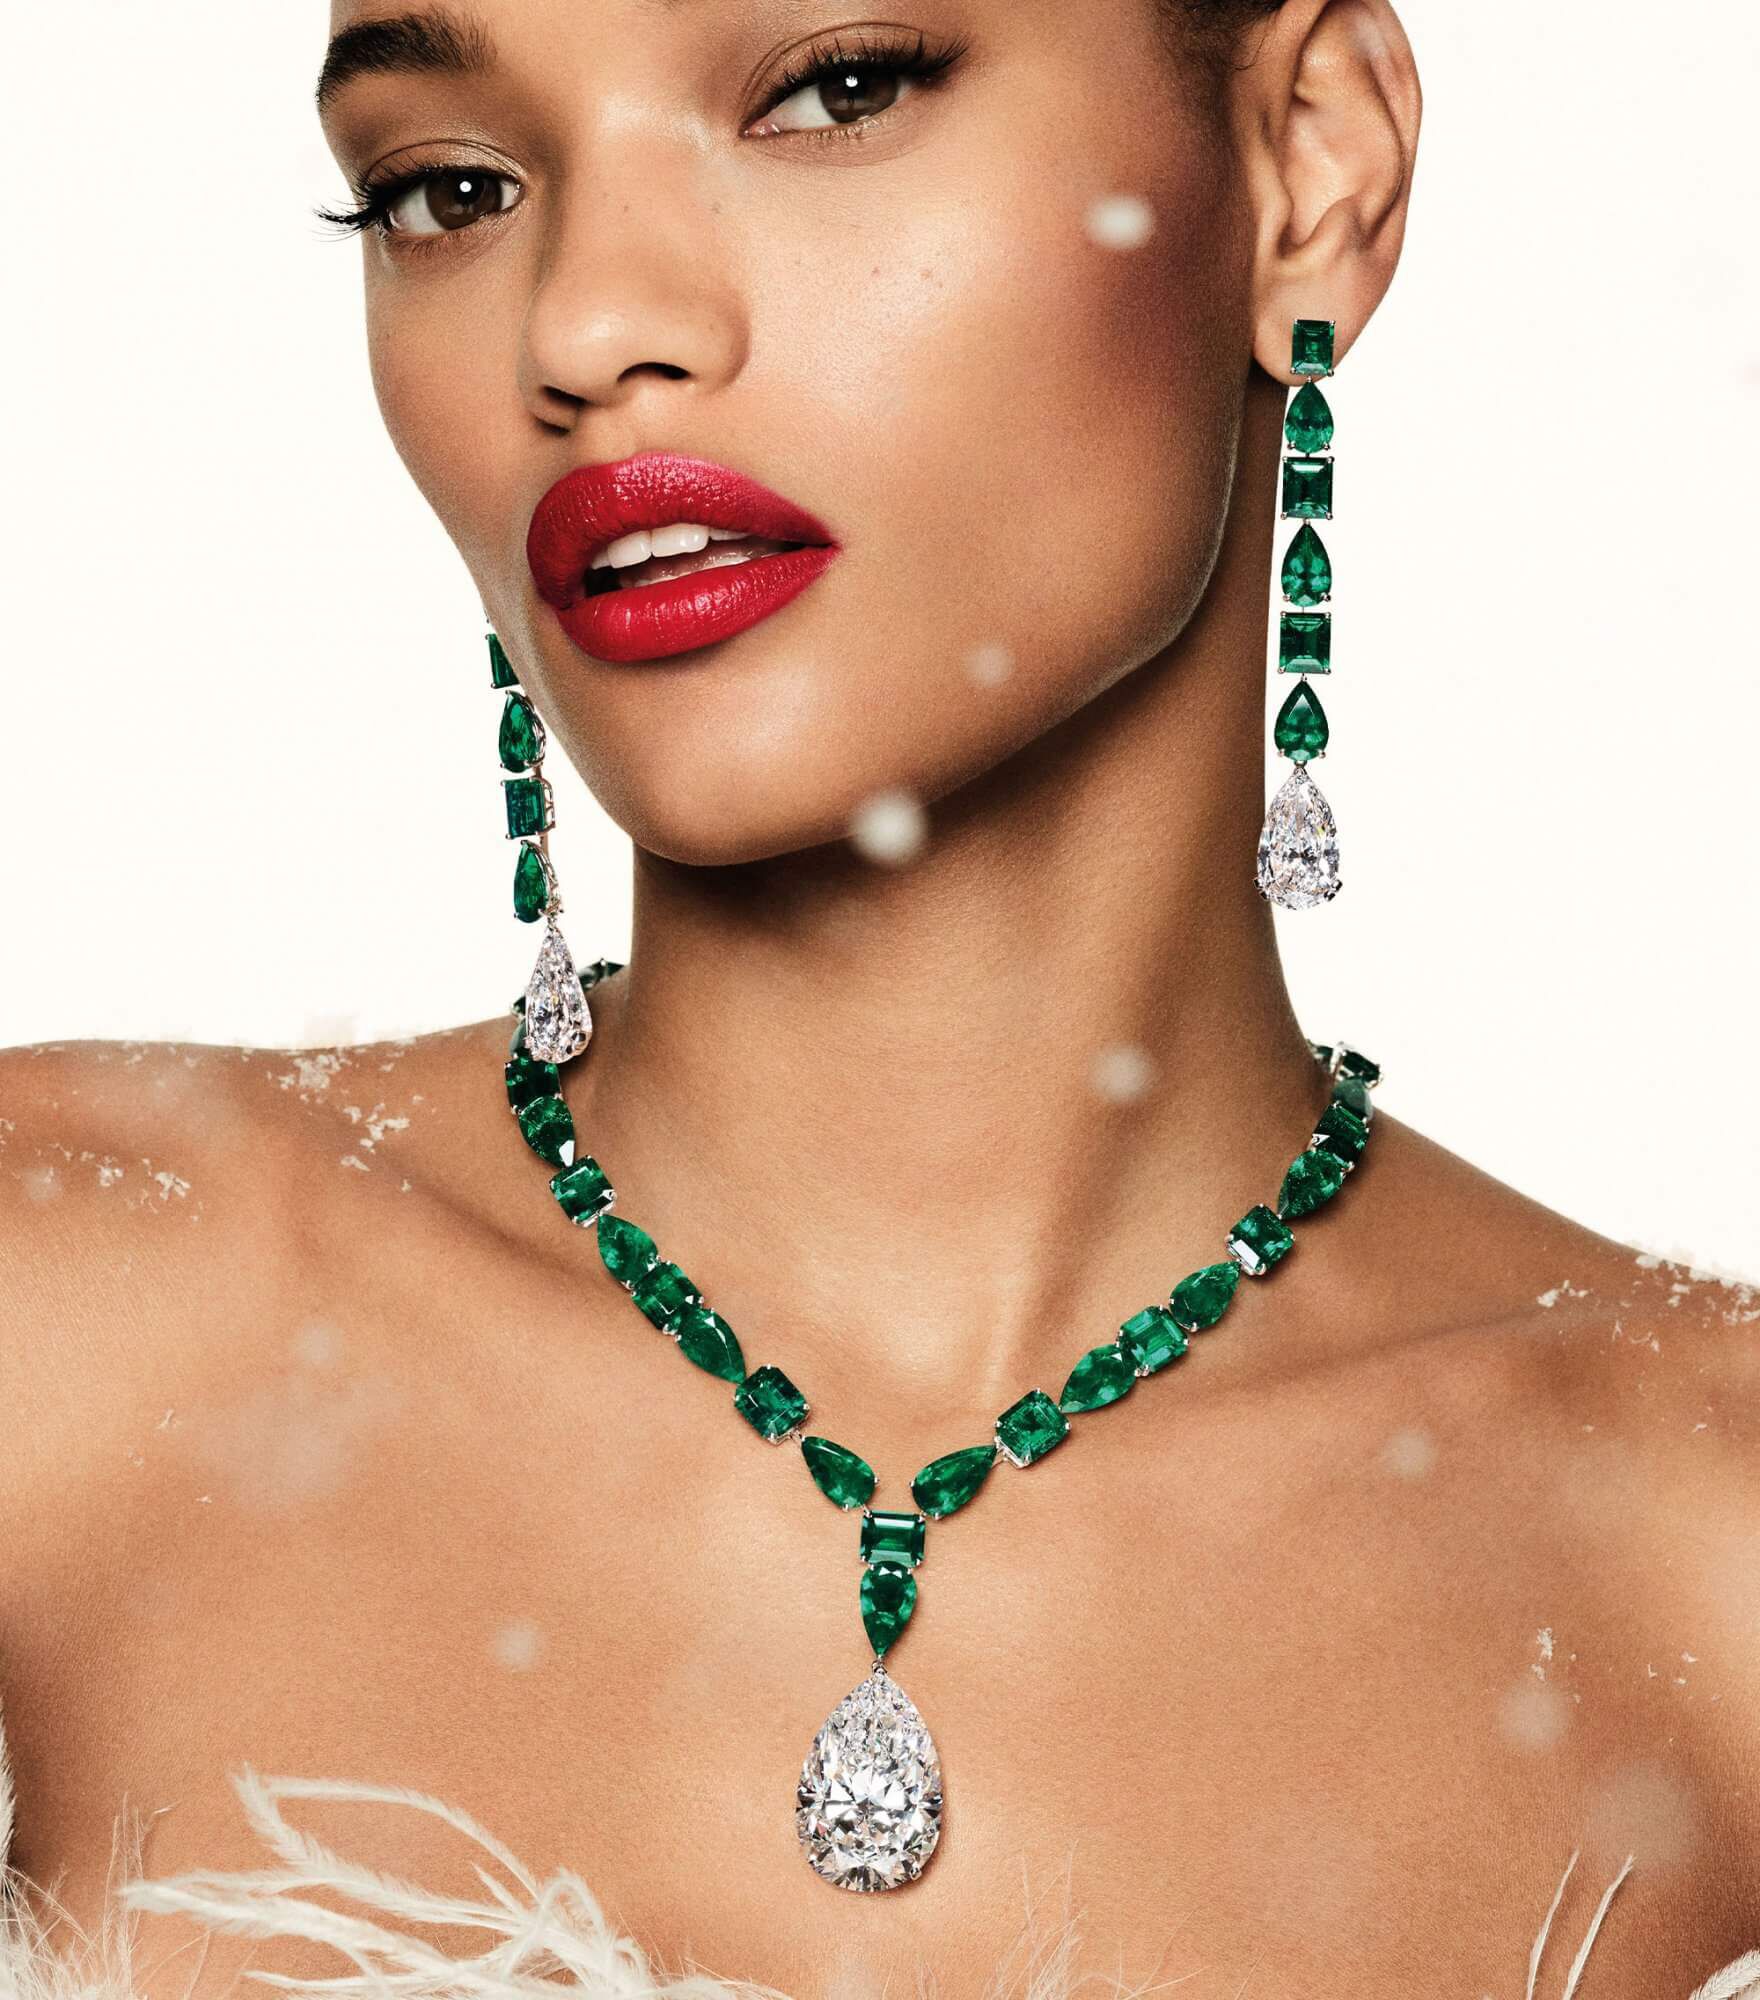 a lady wearing Graff emerald cabochon high jewellery necklace and earrings